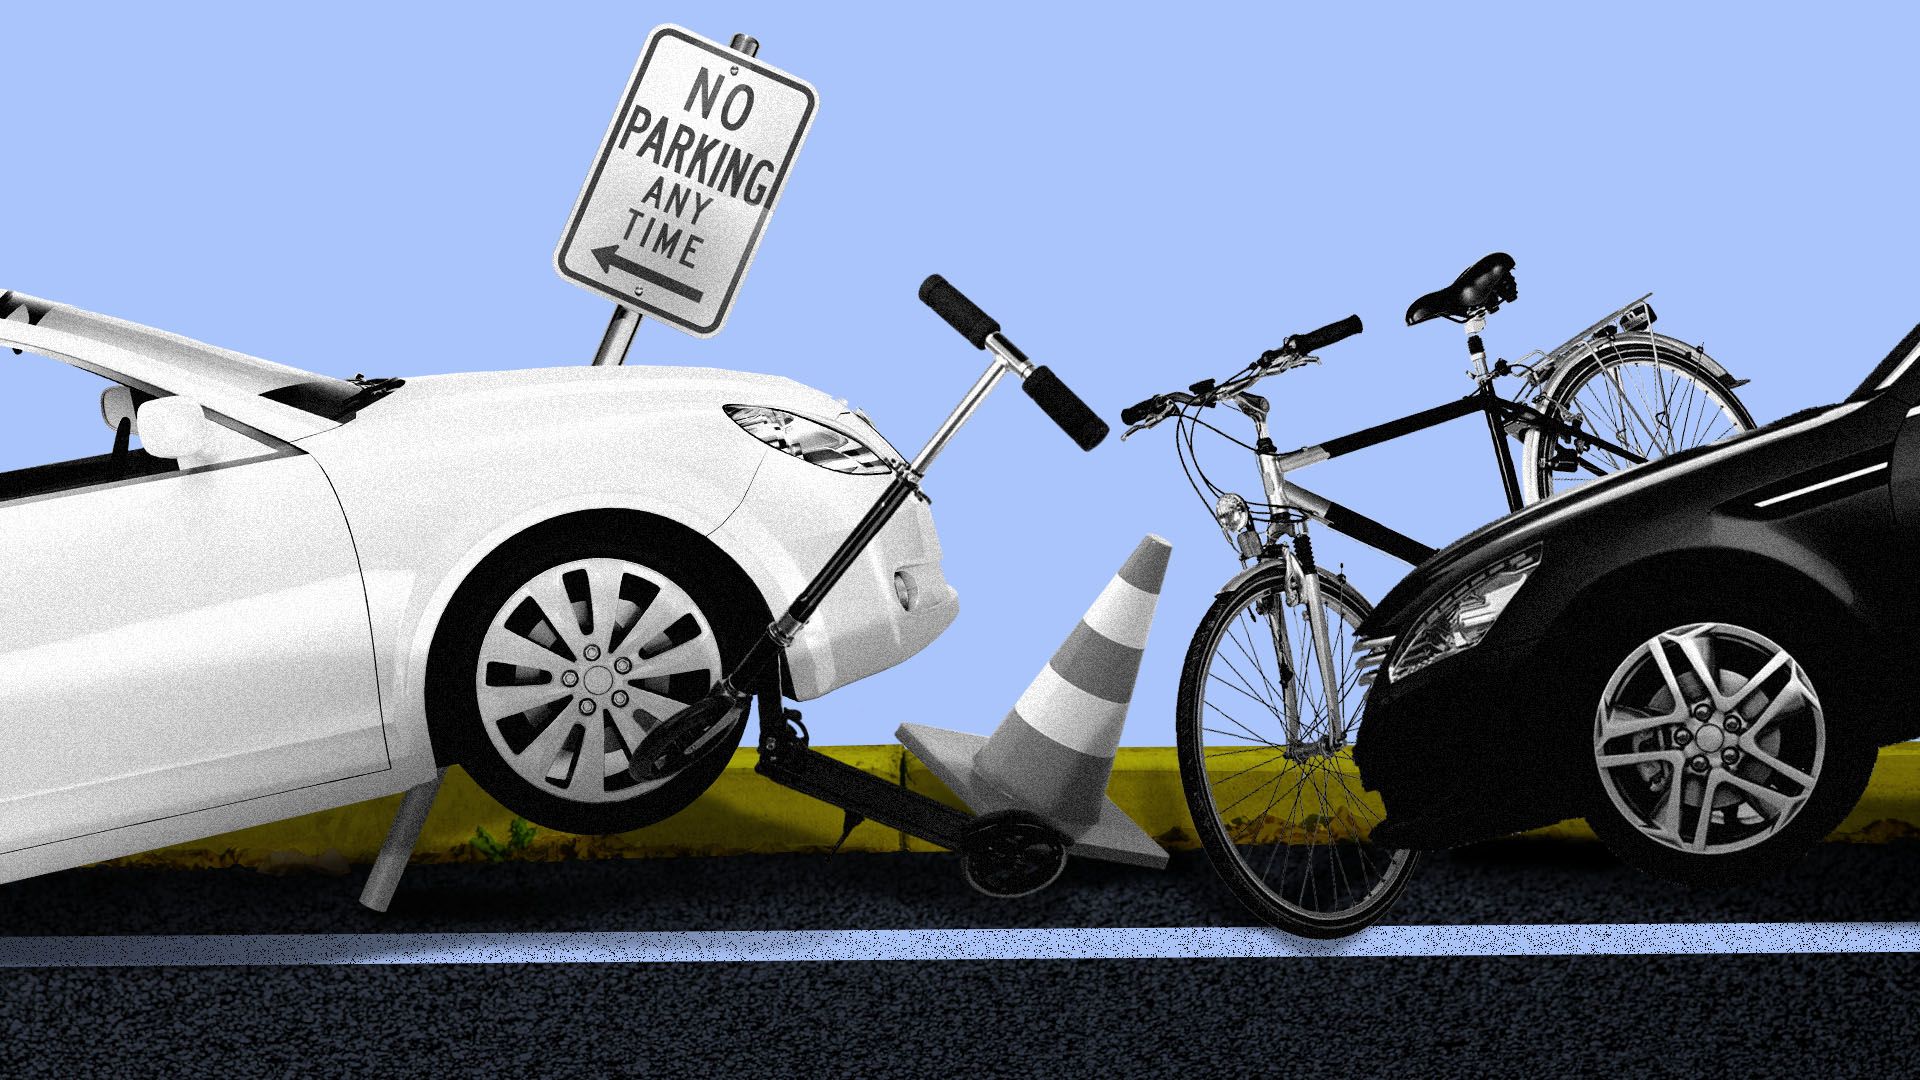 Illustration of a curb congested with cars, a bike, a scooter, a traffic cone, and a no parking sign